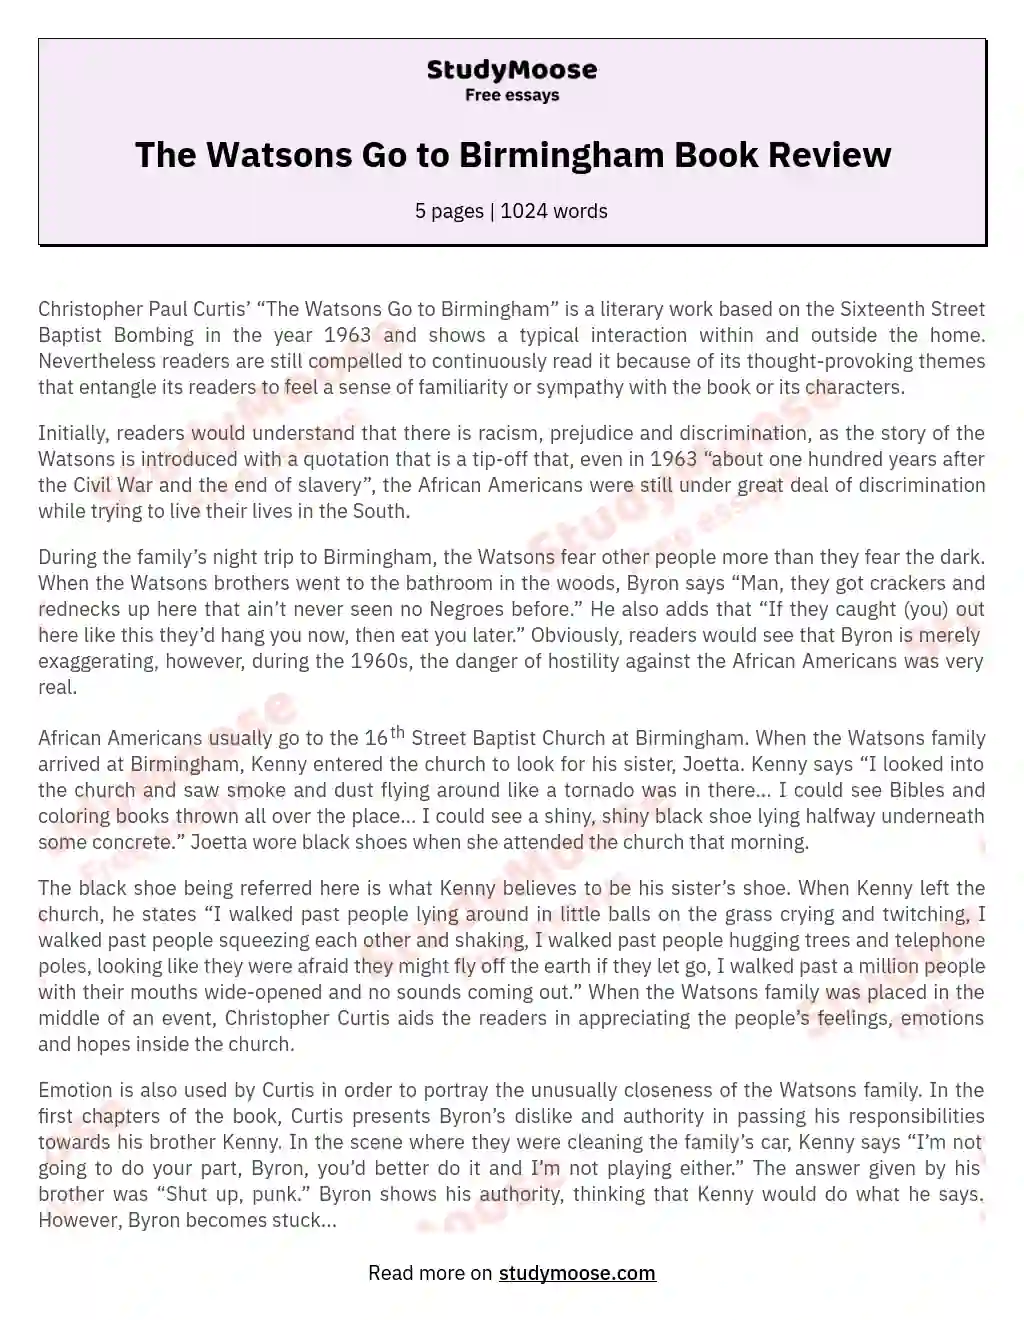 The Watsons Go to Birmingham Book Review essay